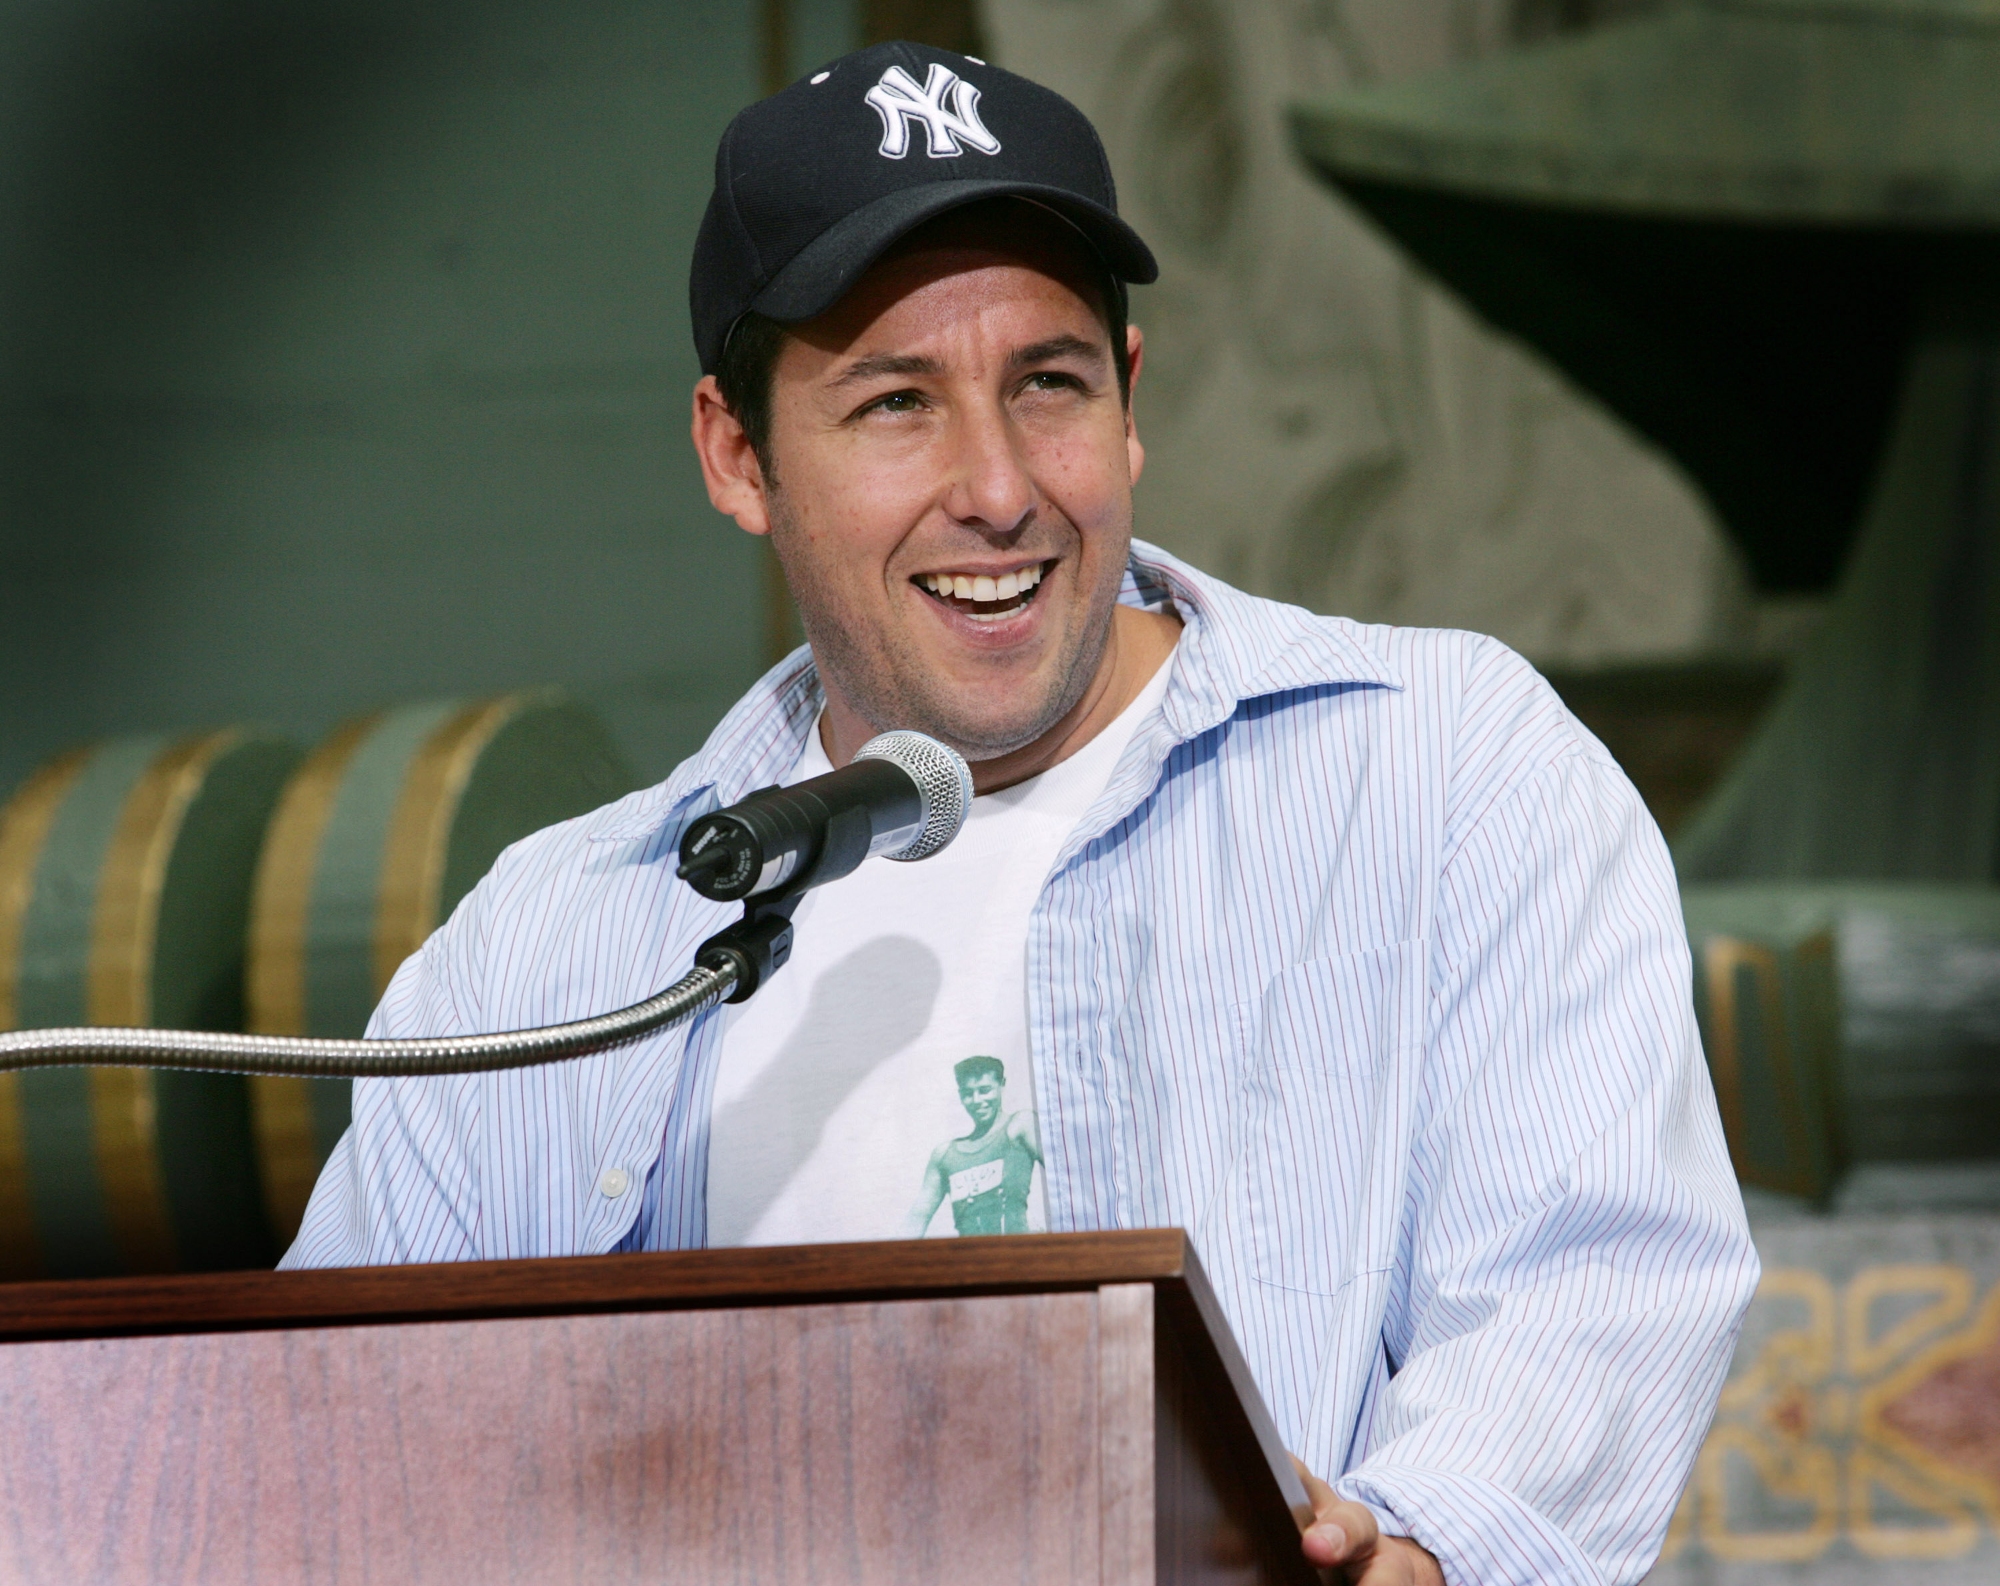 Ex-'Saturday Night Live' cast member Adam Sandler standing behind a podium with a microphone. He's smiling and wearing a baseball cap and an opened collared shirt with a white shirt underneath.